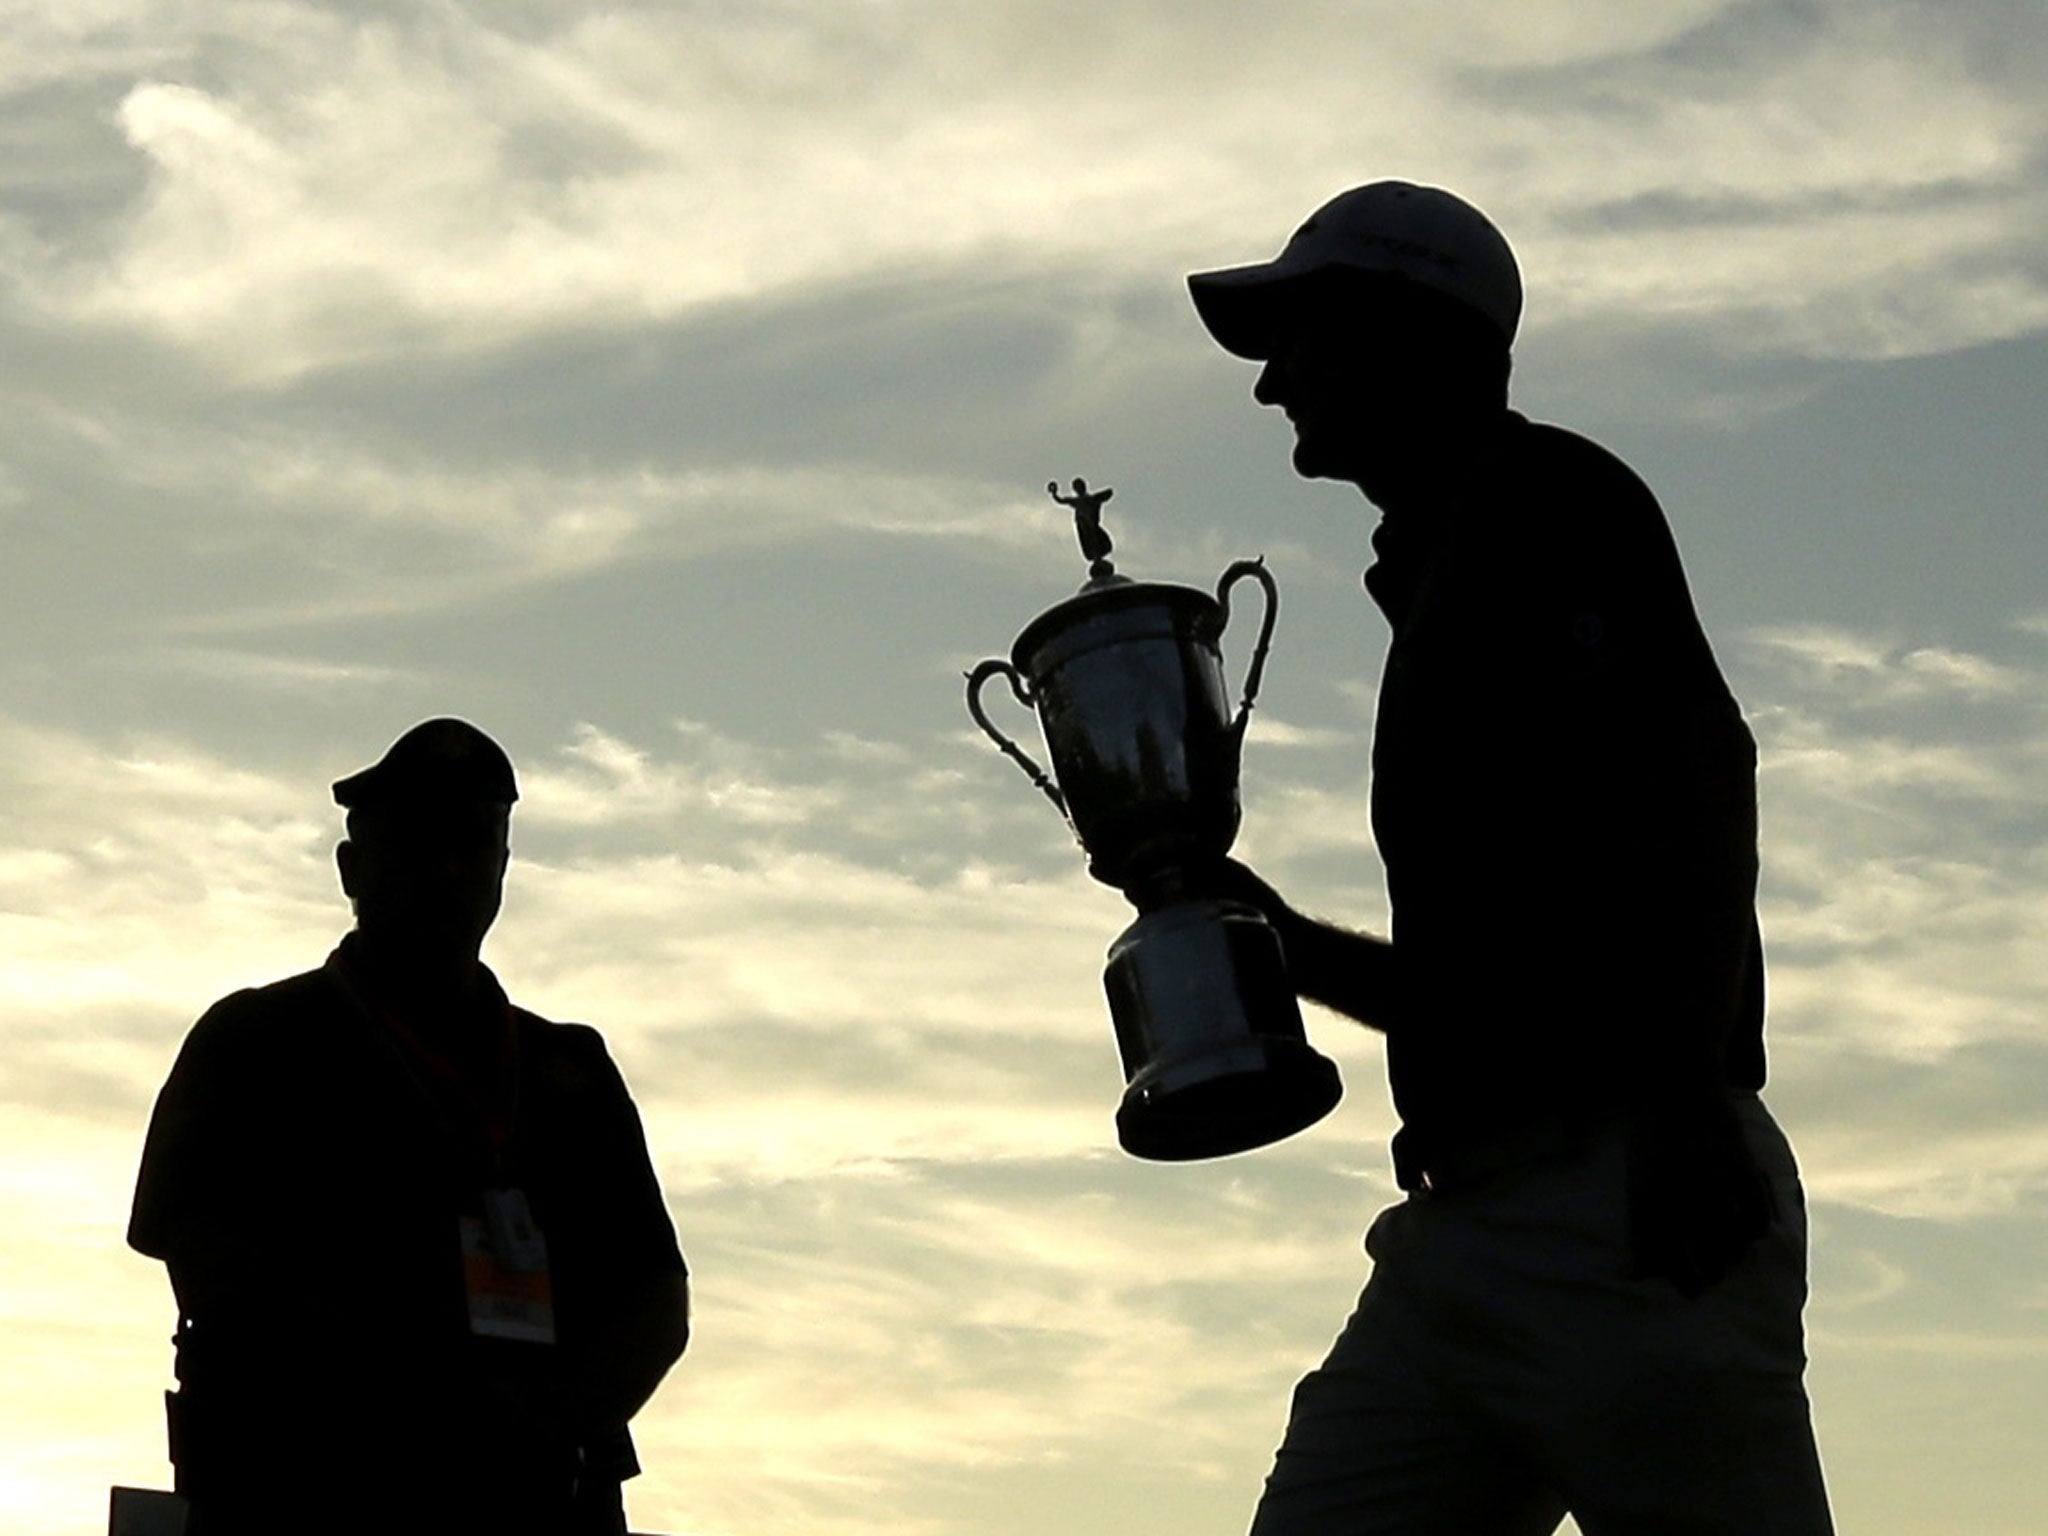 Justin Rose carries the US Open trophy across the 18th green after his victory